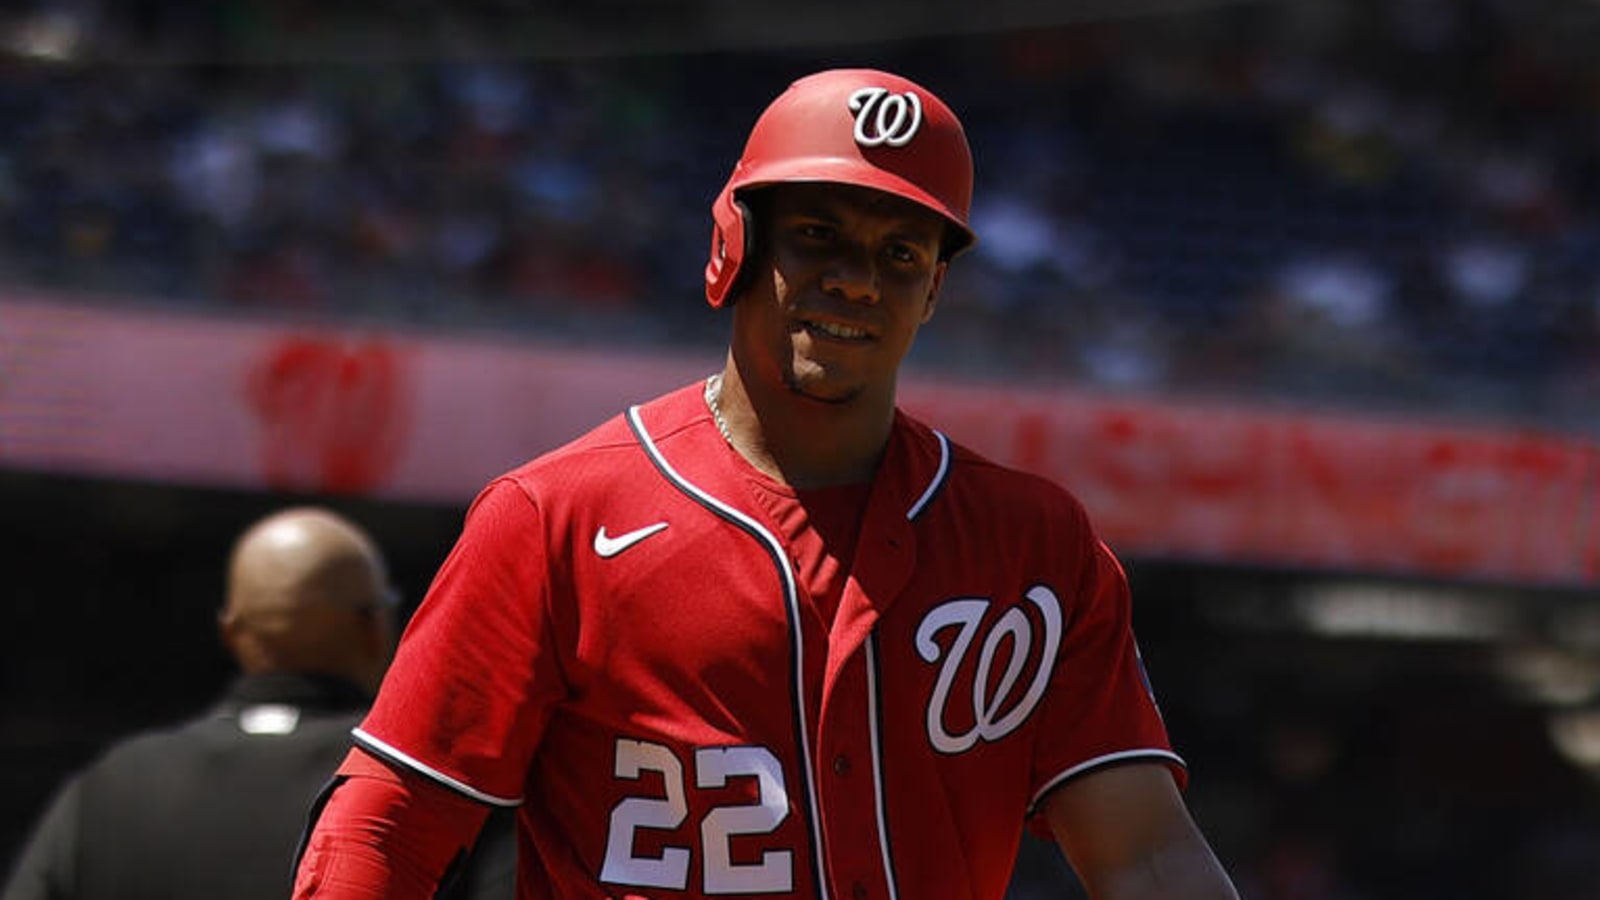 Nationals' OF Juan Soto leaves game with left calf pain; will undergo MRI